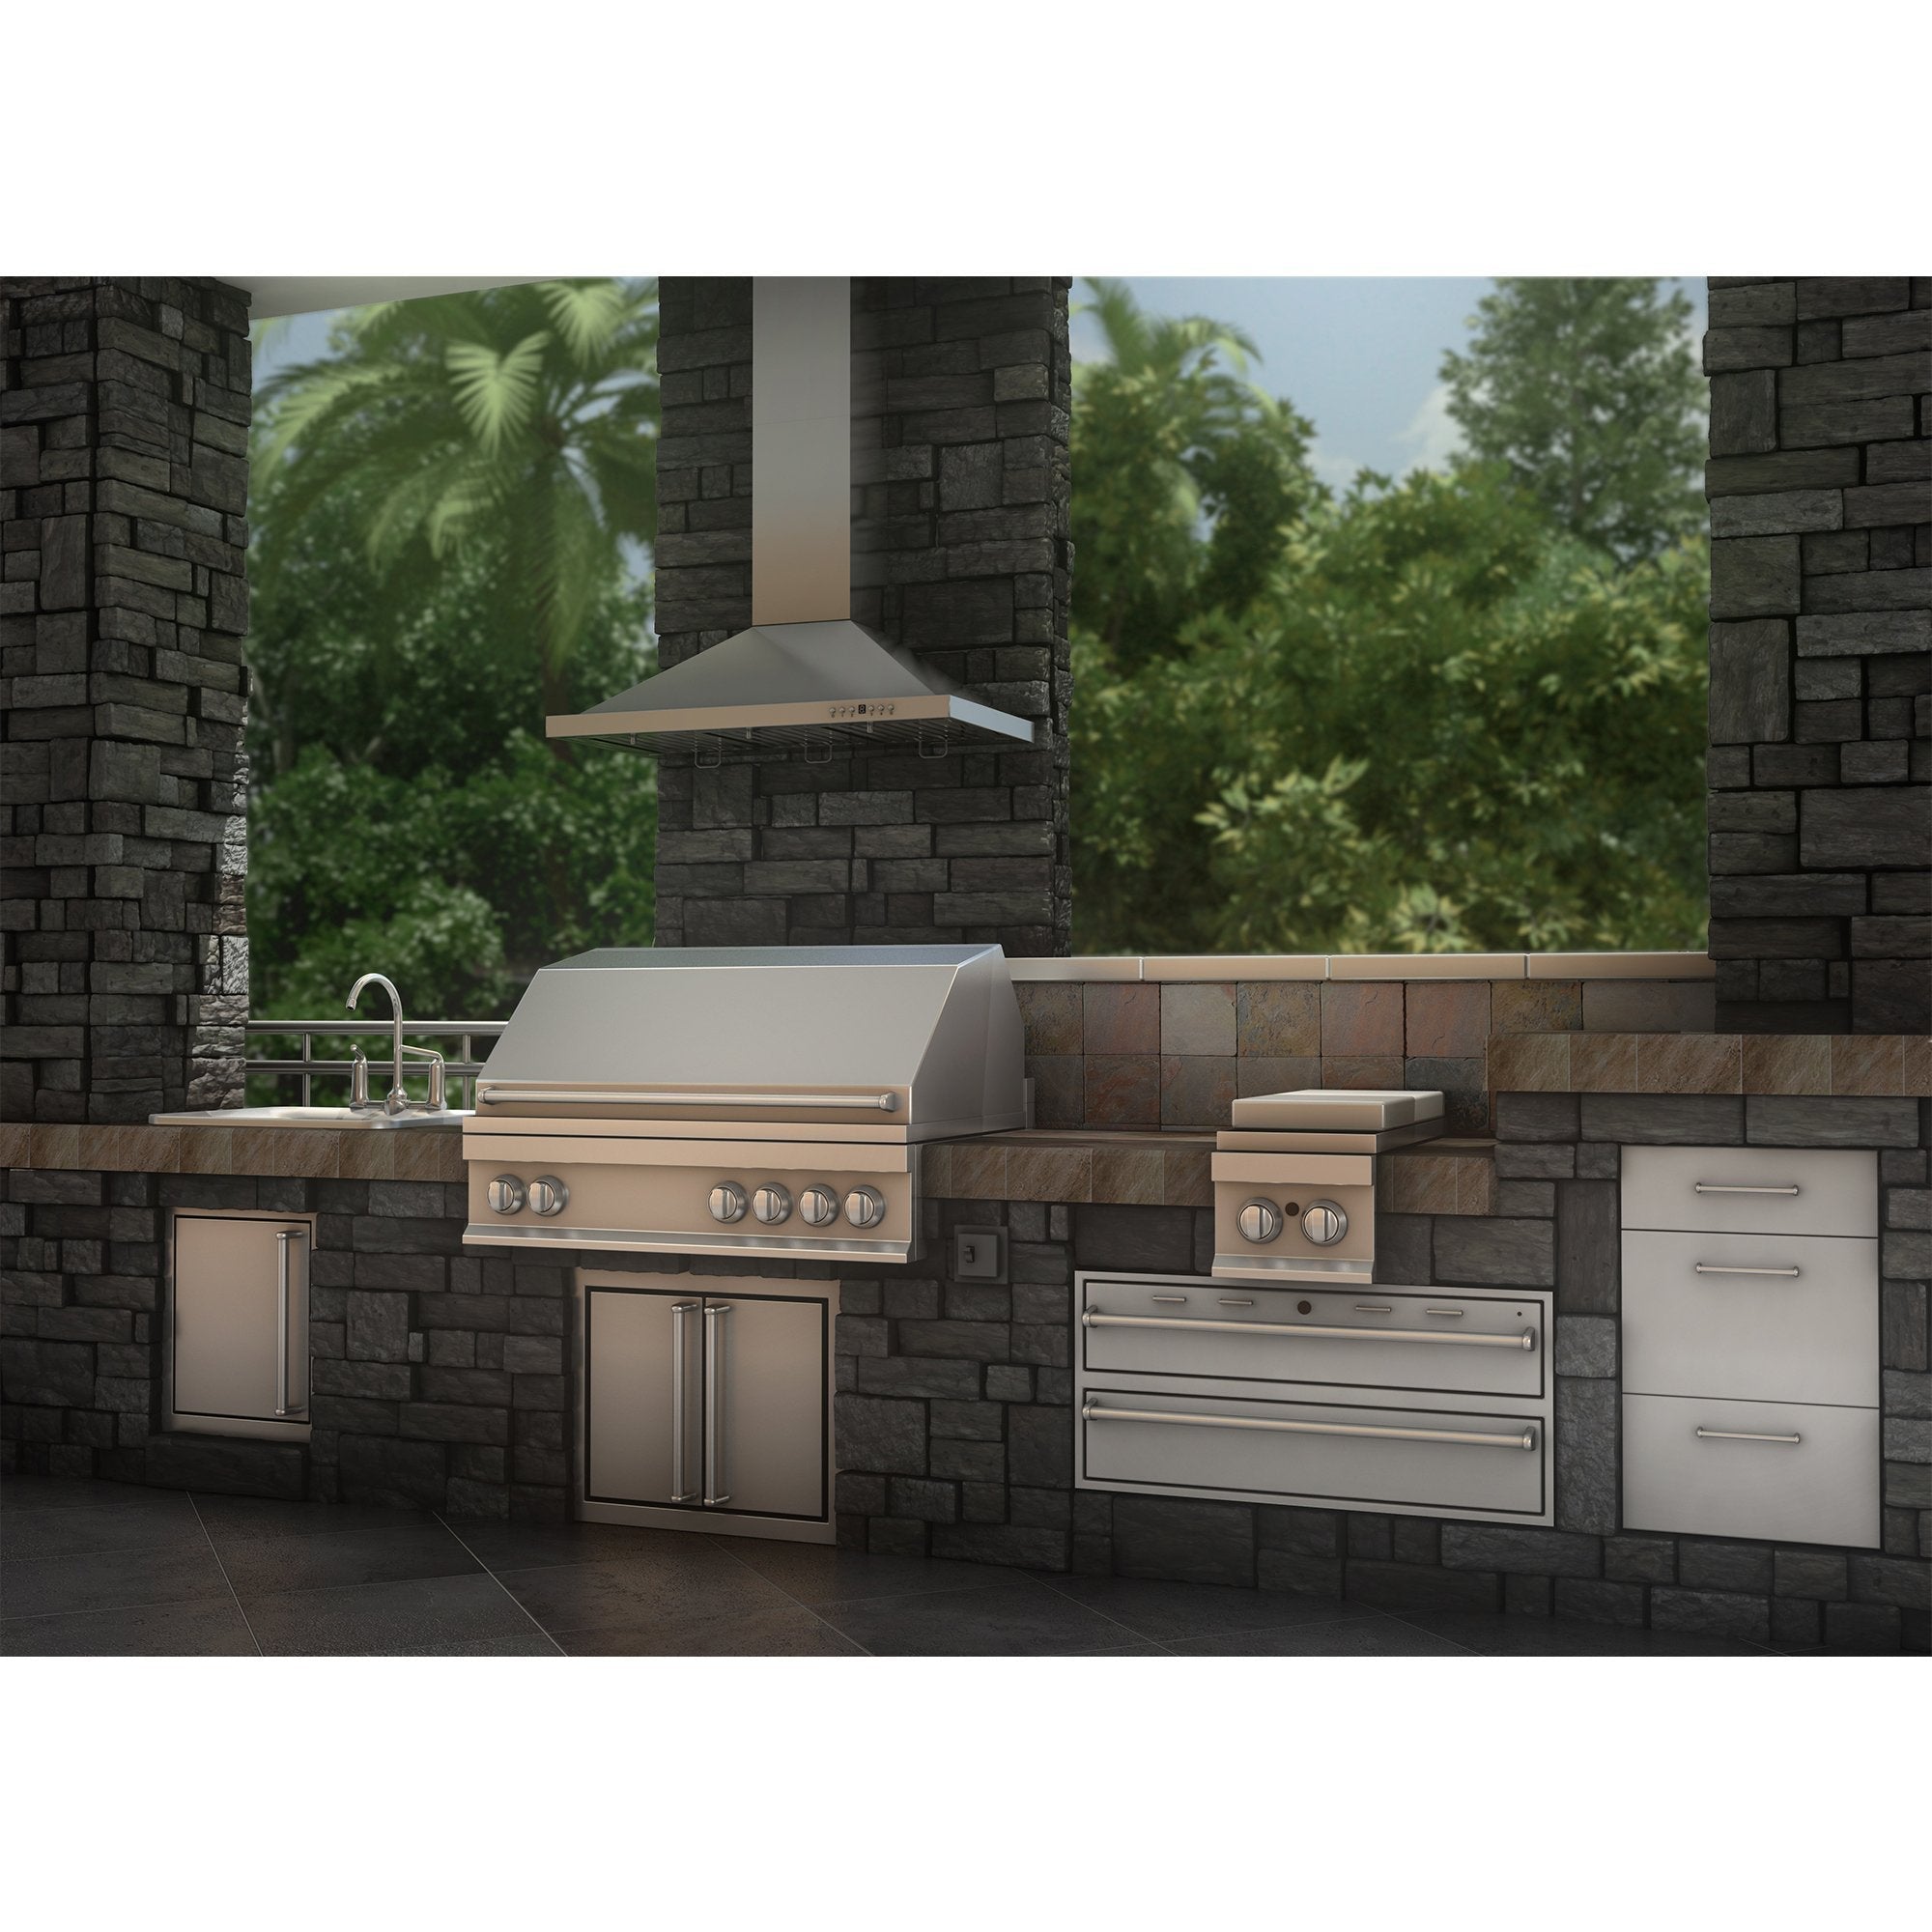 ZLINE Convertible Vent Outdoor Approved Wall Mount Range Hood in Stainless Steel (KB-304) - New Star Living